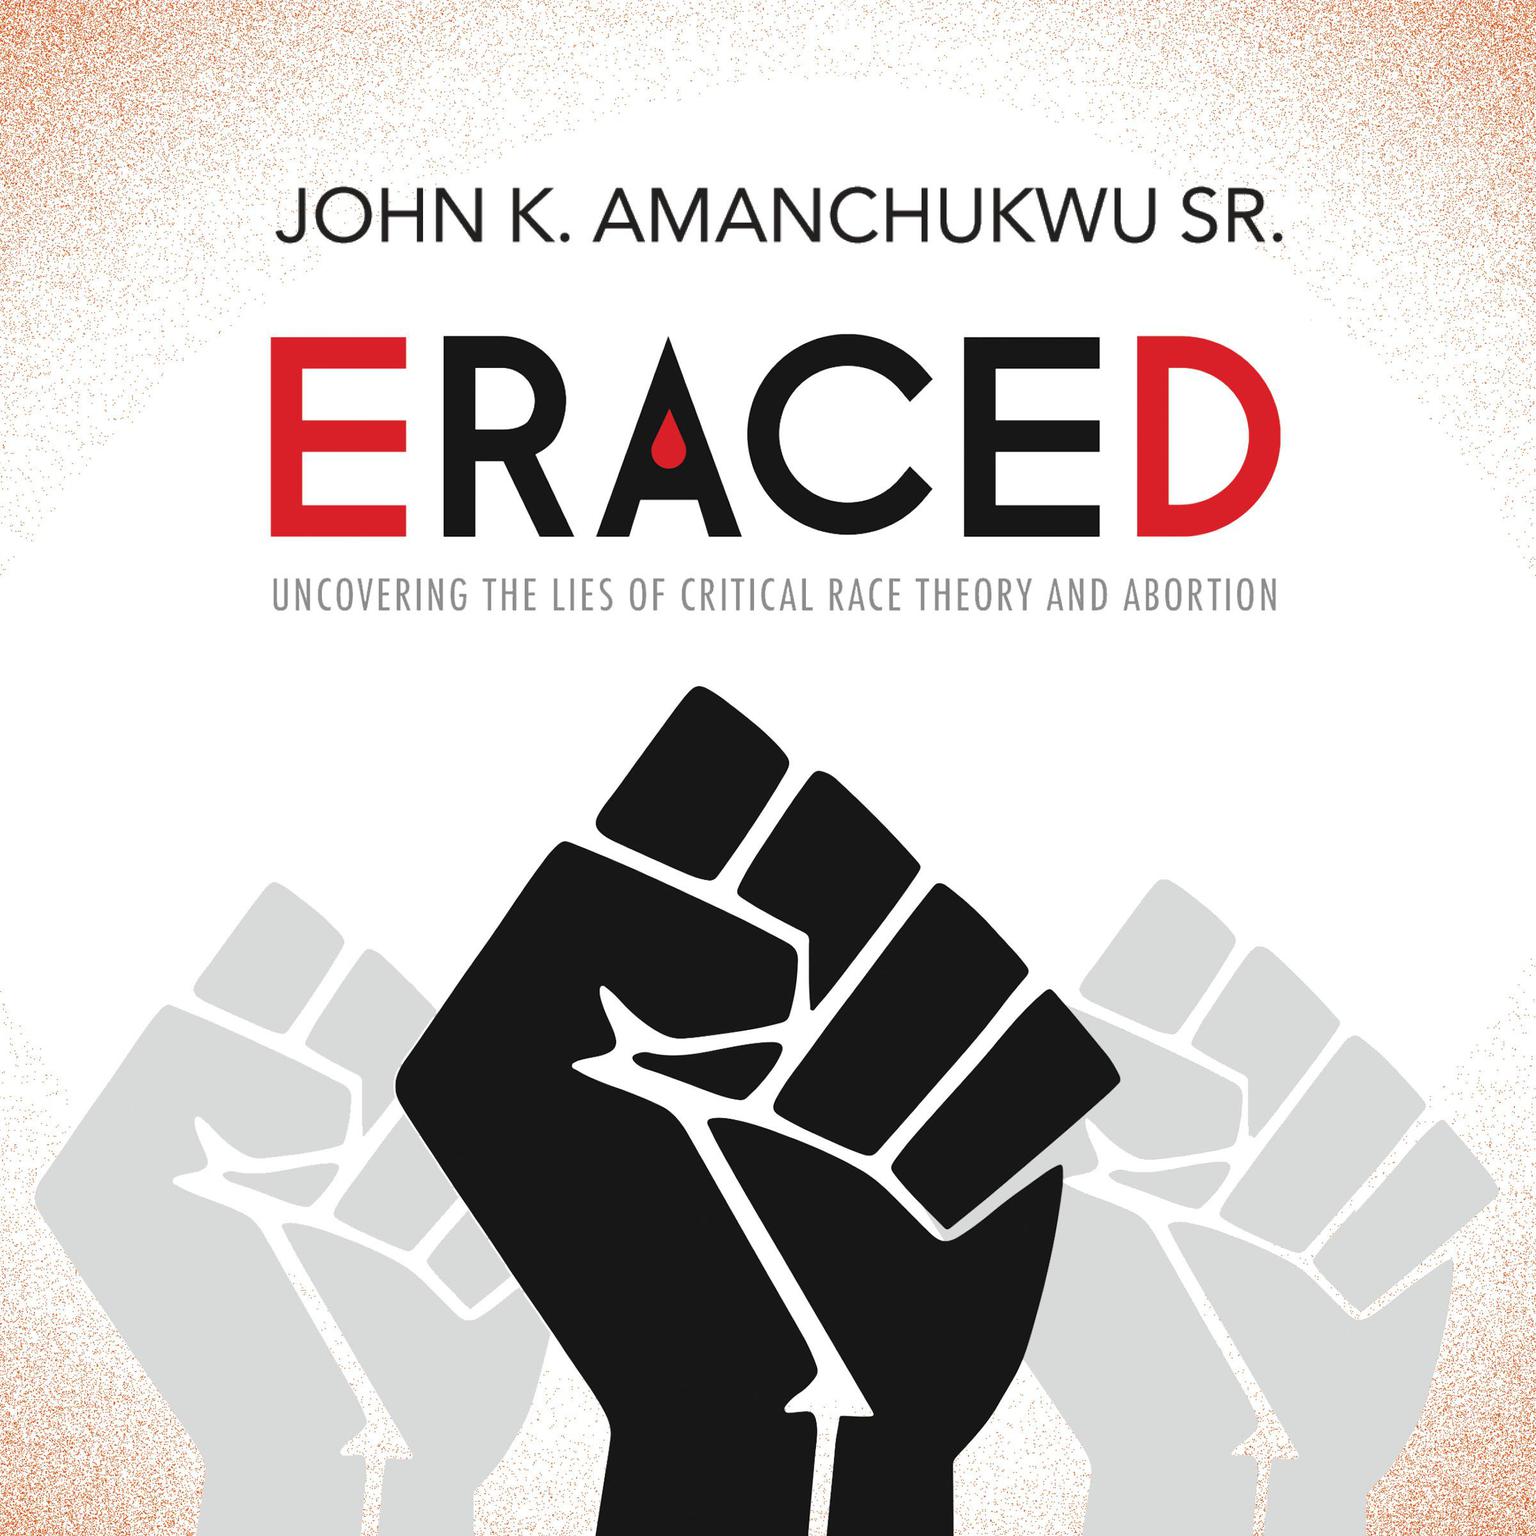 Eraced: Uncovering the Lies of Critical Race Theory and Abortion Audiobook, by John K. Amanchukwu